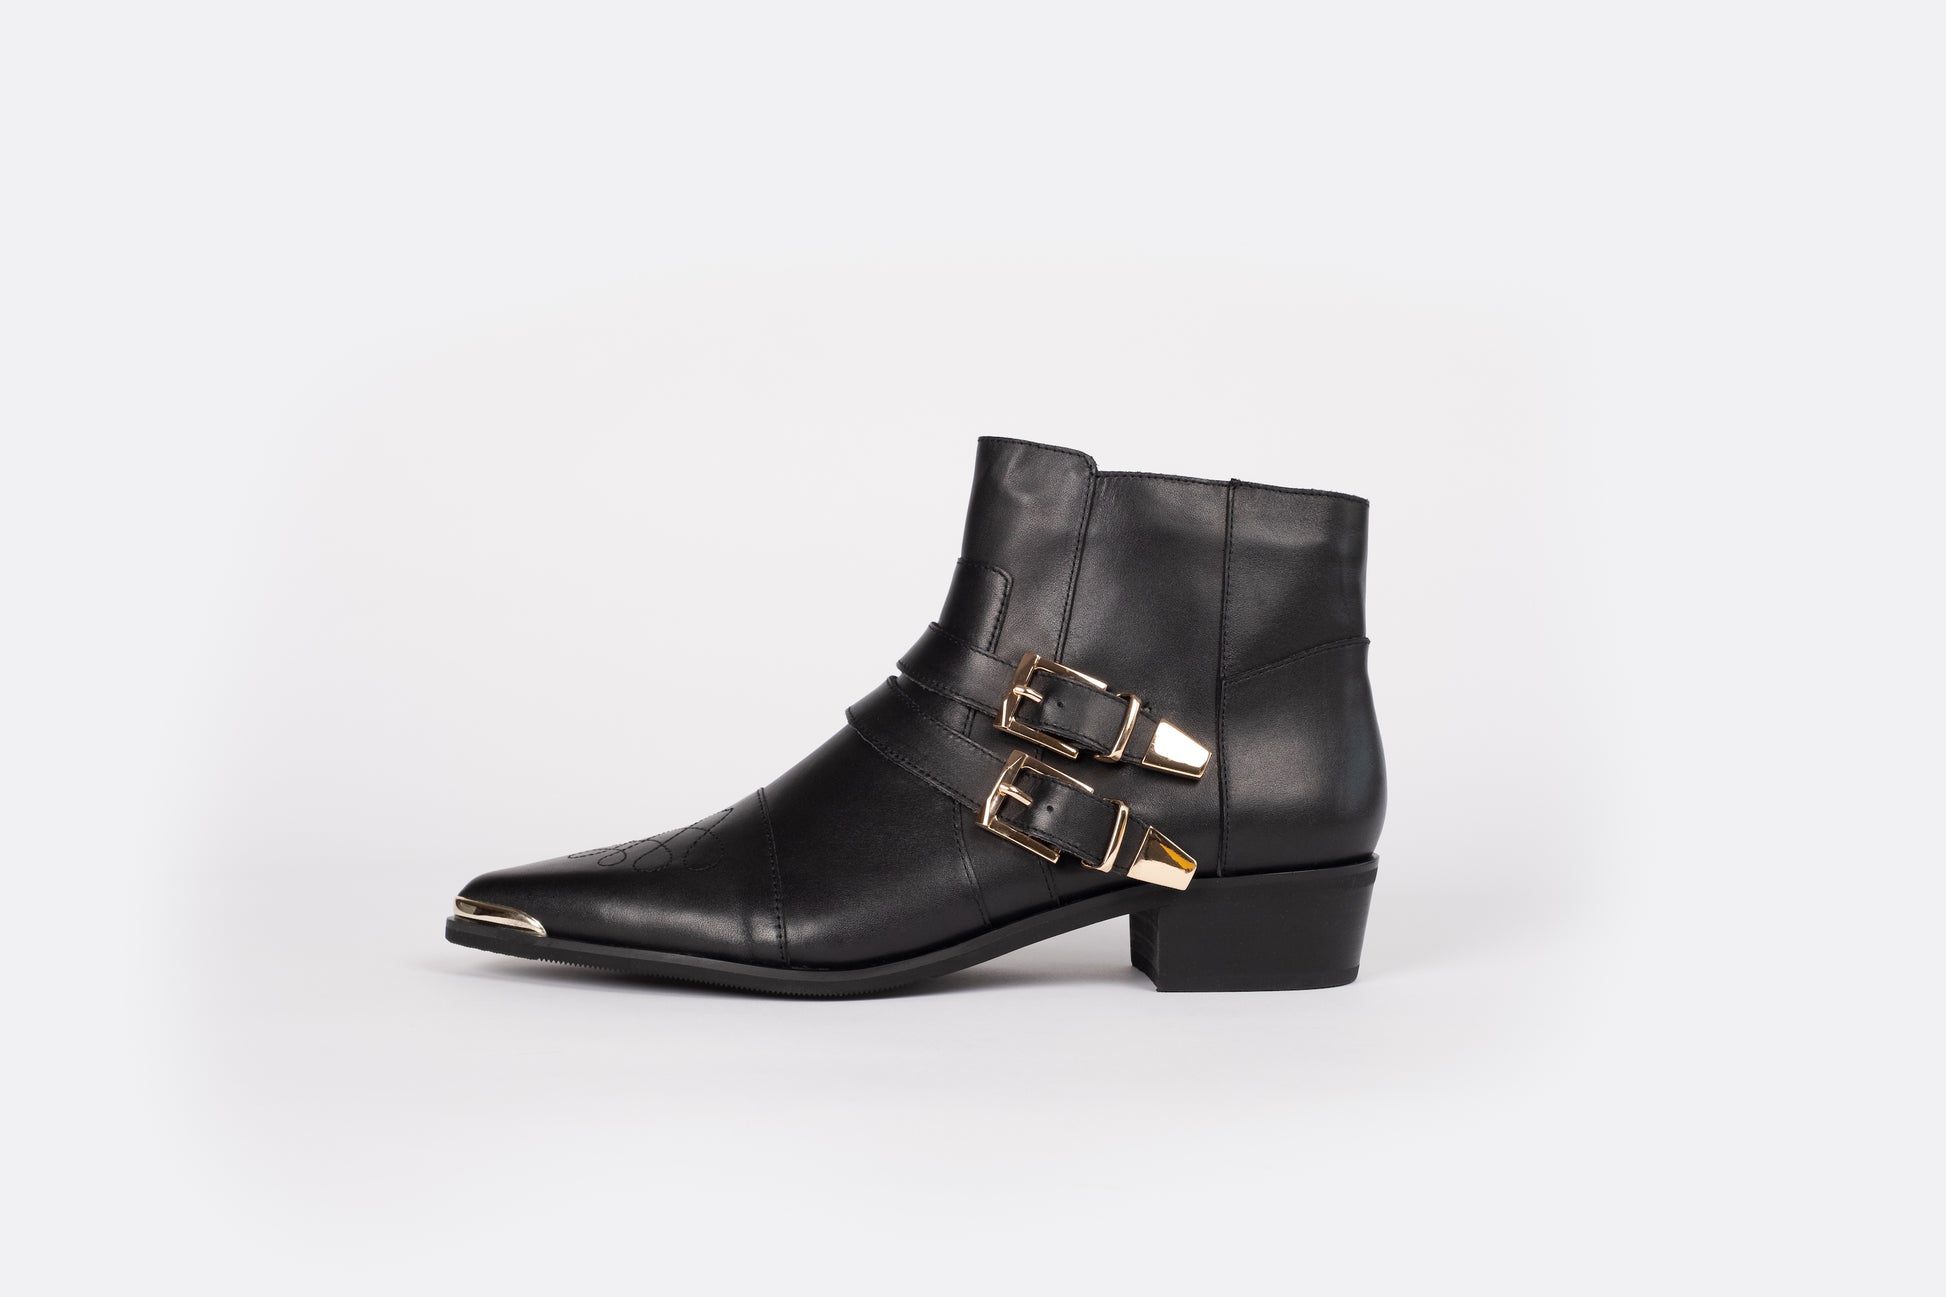 A side profile of the Otto + Ivy black Tilly Boot, a western style ankle boot for tall women with large feet, featuring gold buckles and hardware.